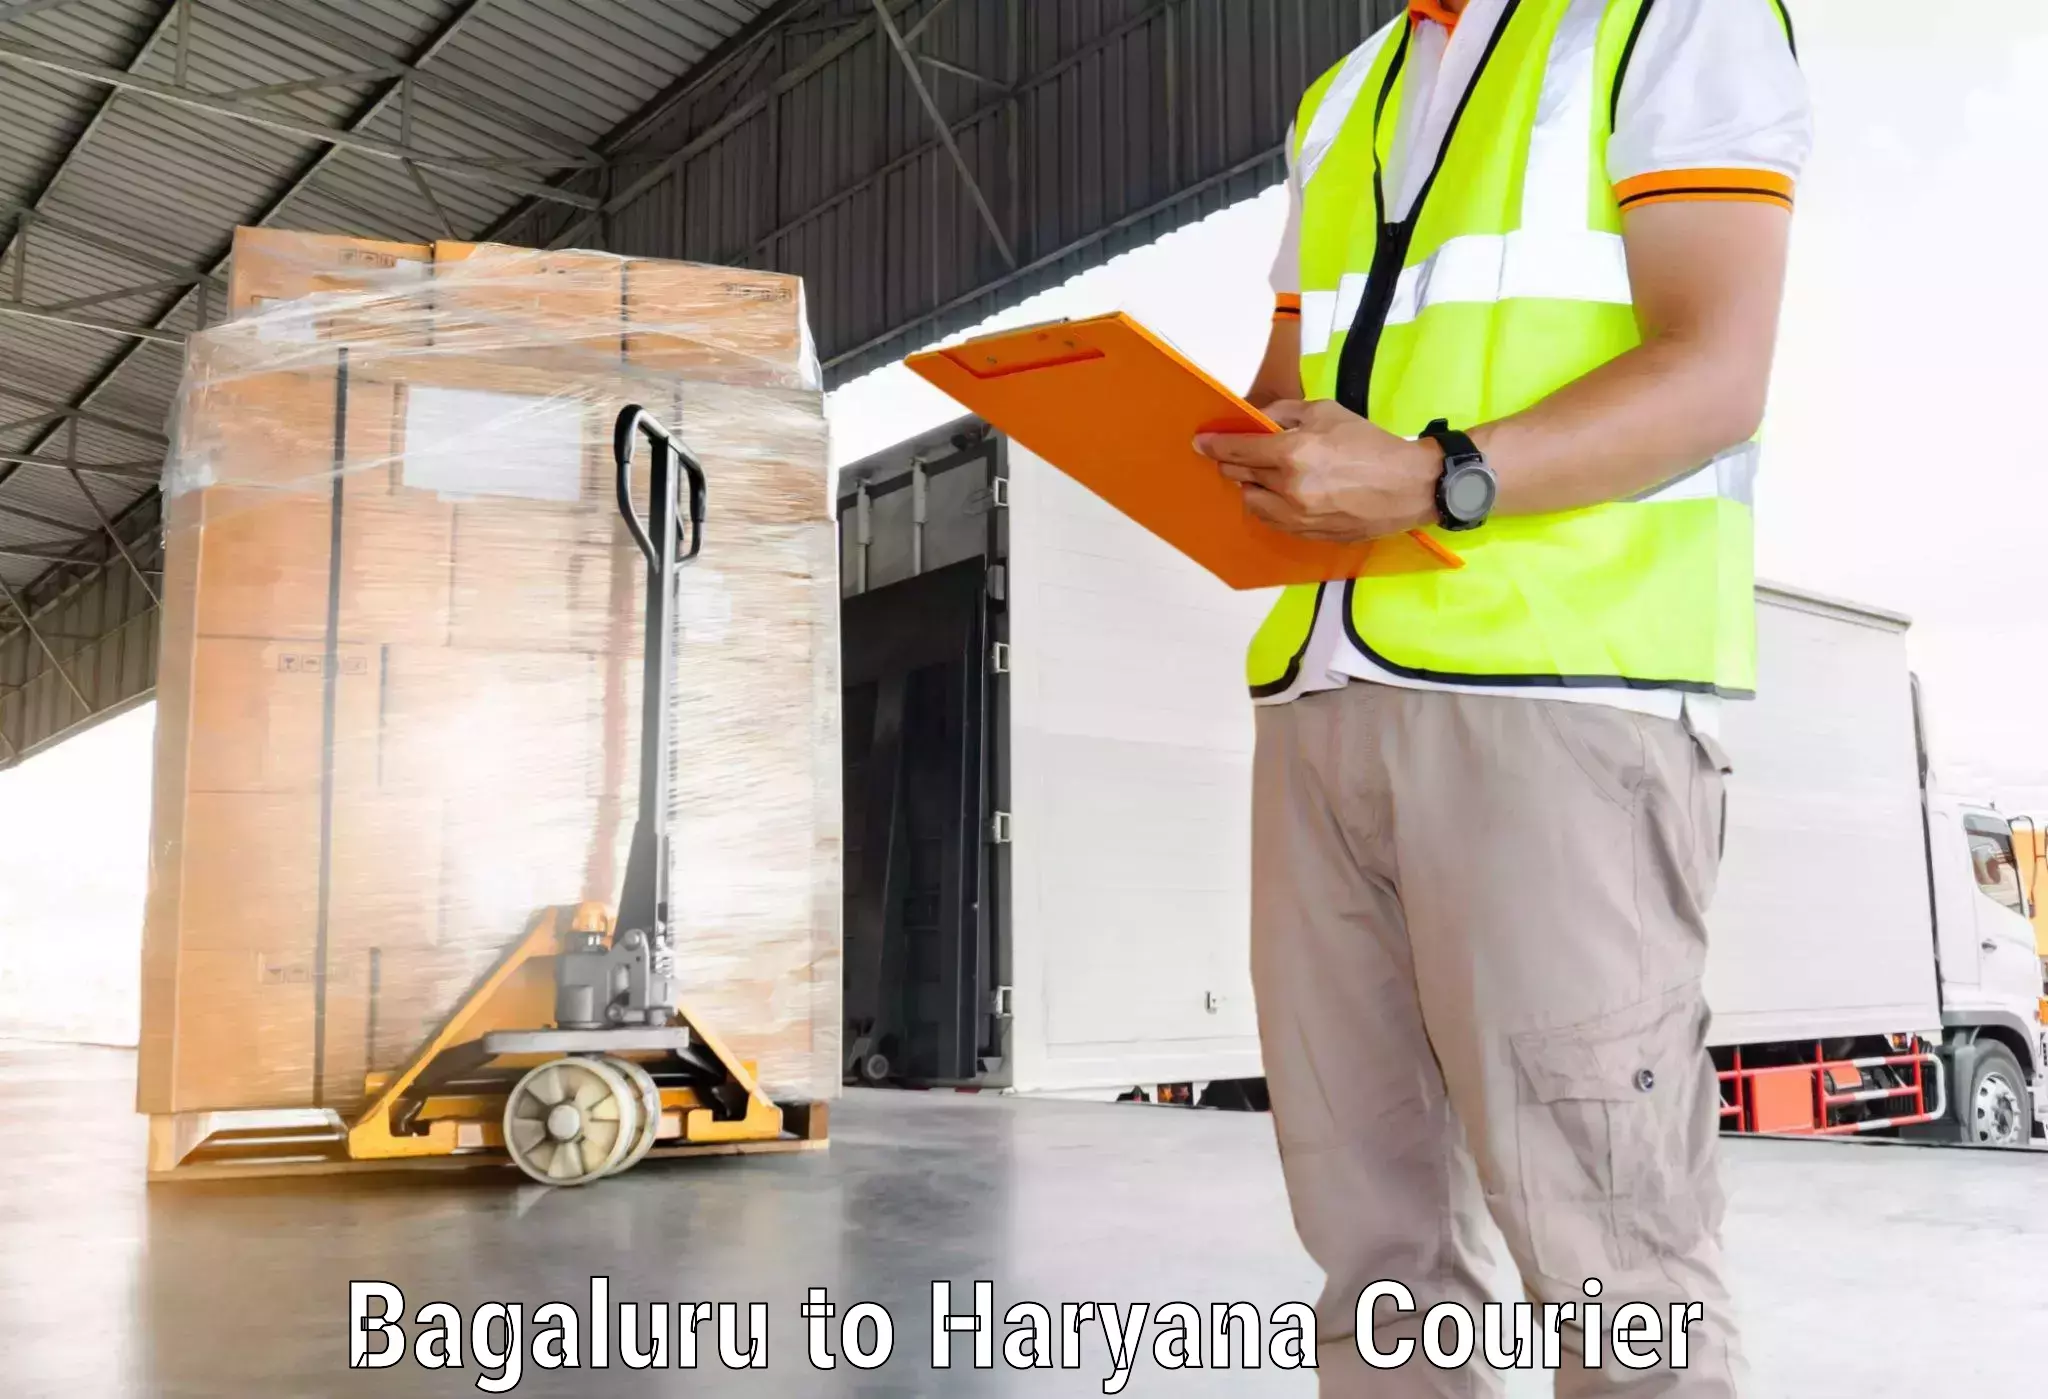 Courier rate comparison Bagaluru to NCR Haryana